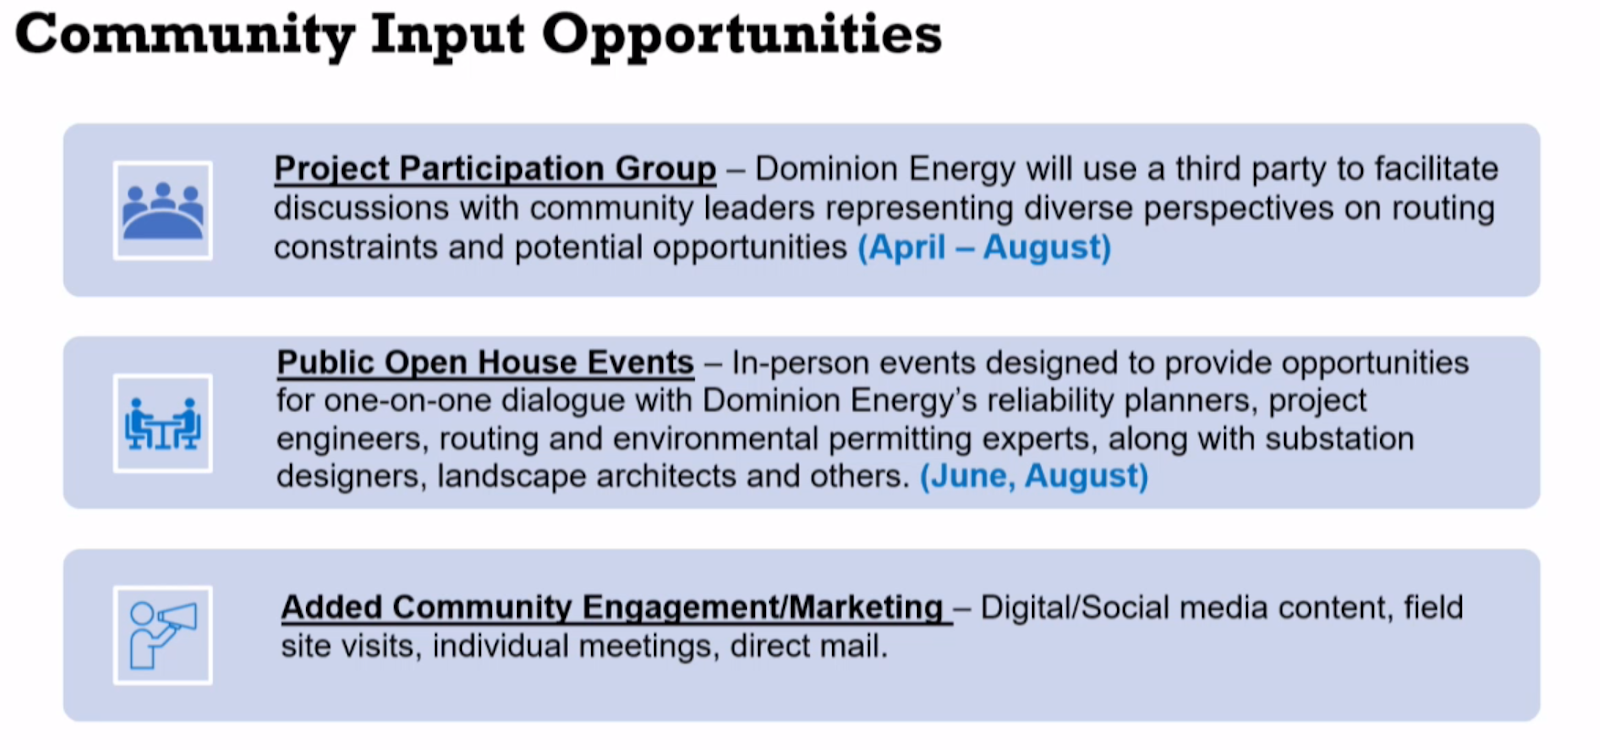 screenshot of presentation slide that says "community input opportunities: project participation group (April-August), public open house events (June, August), added community engagement/markting